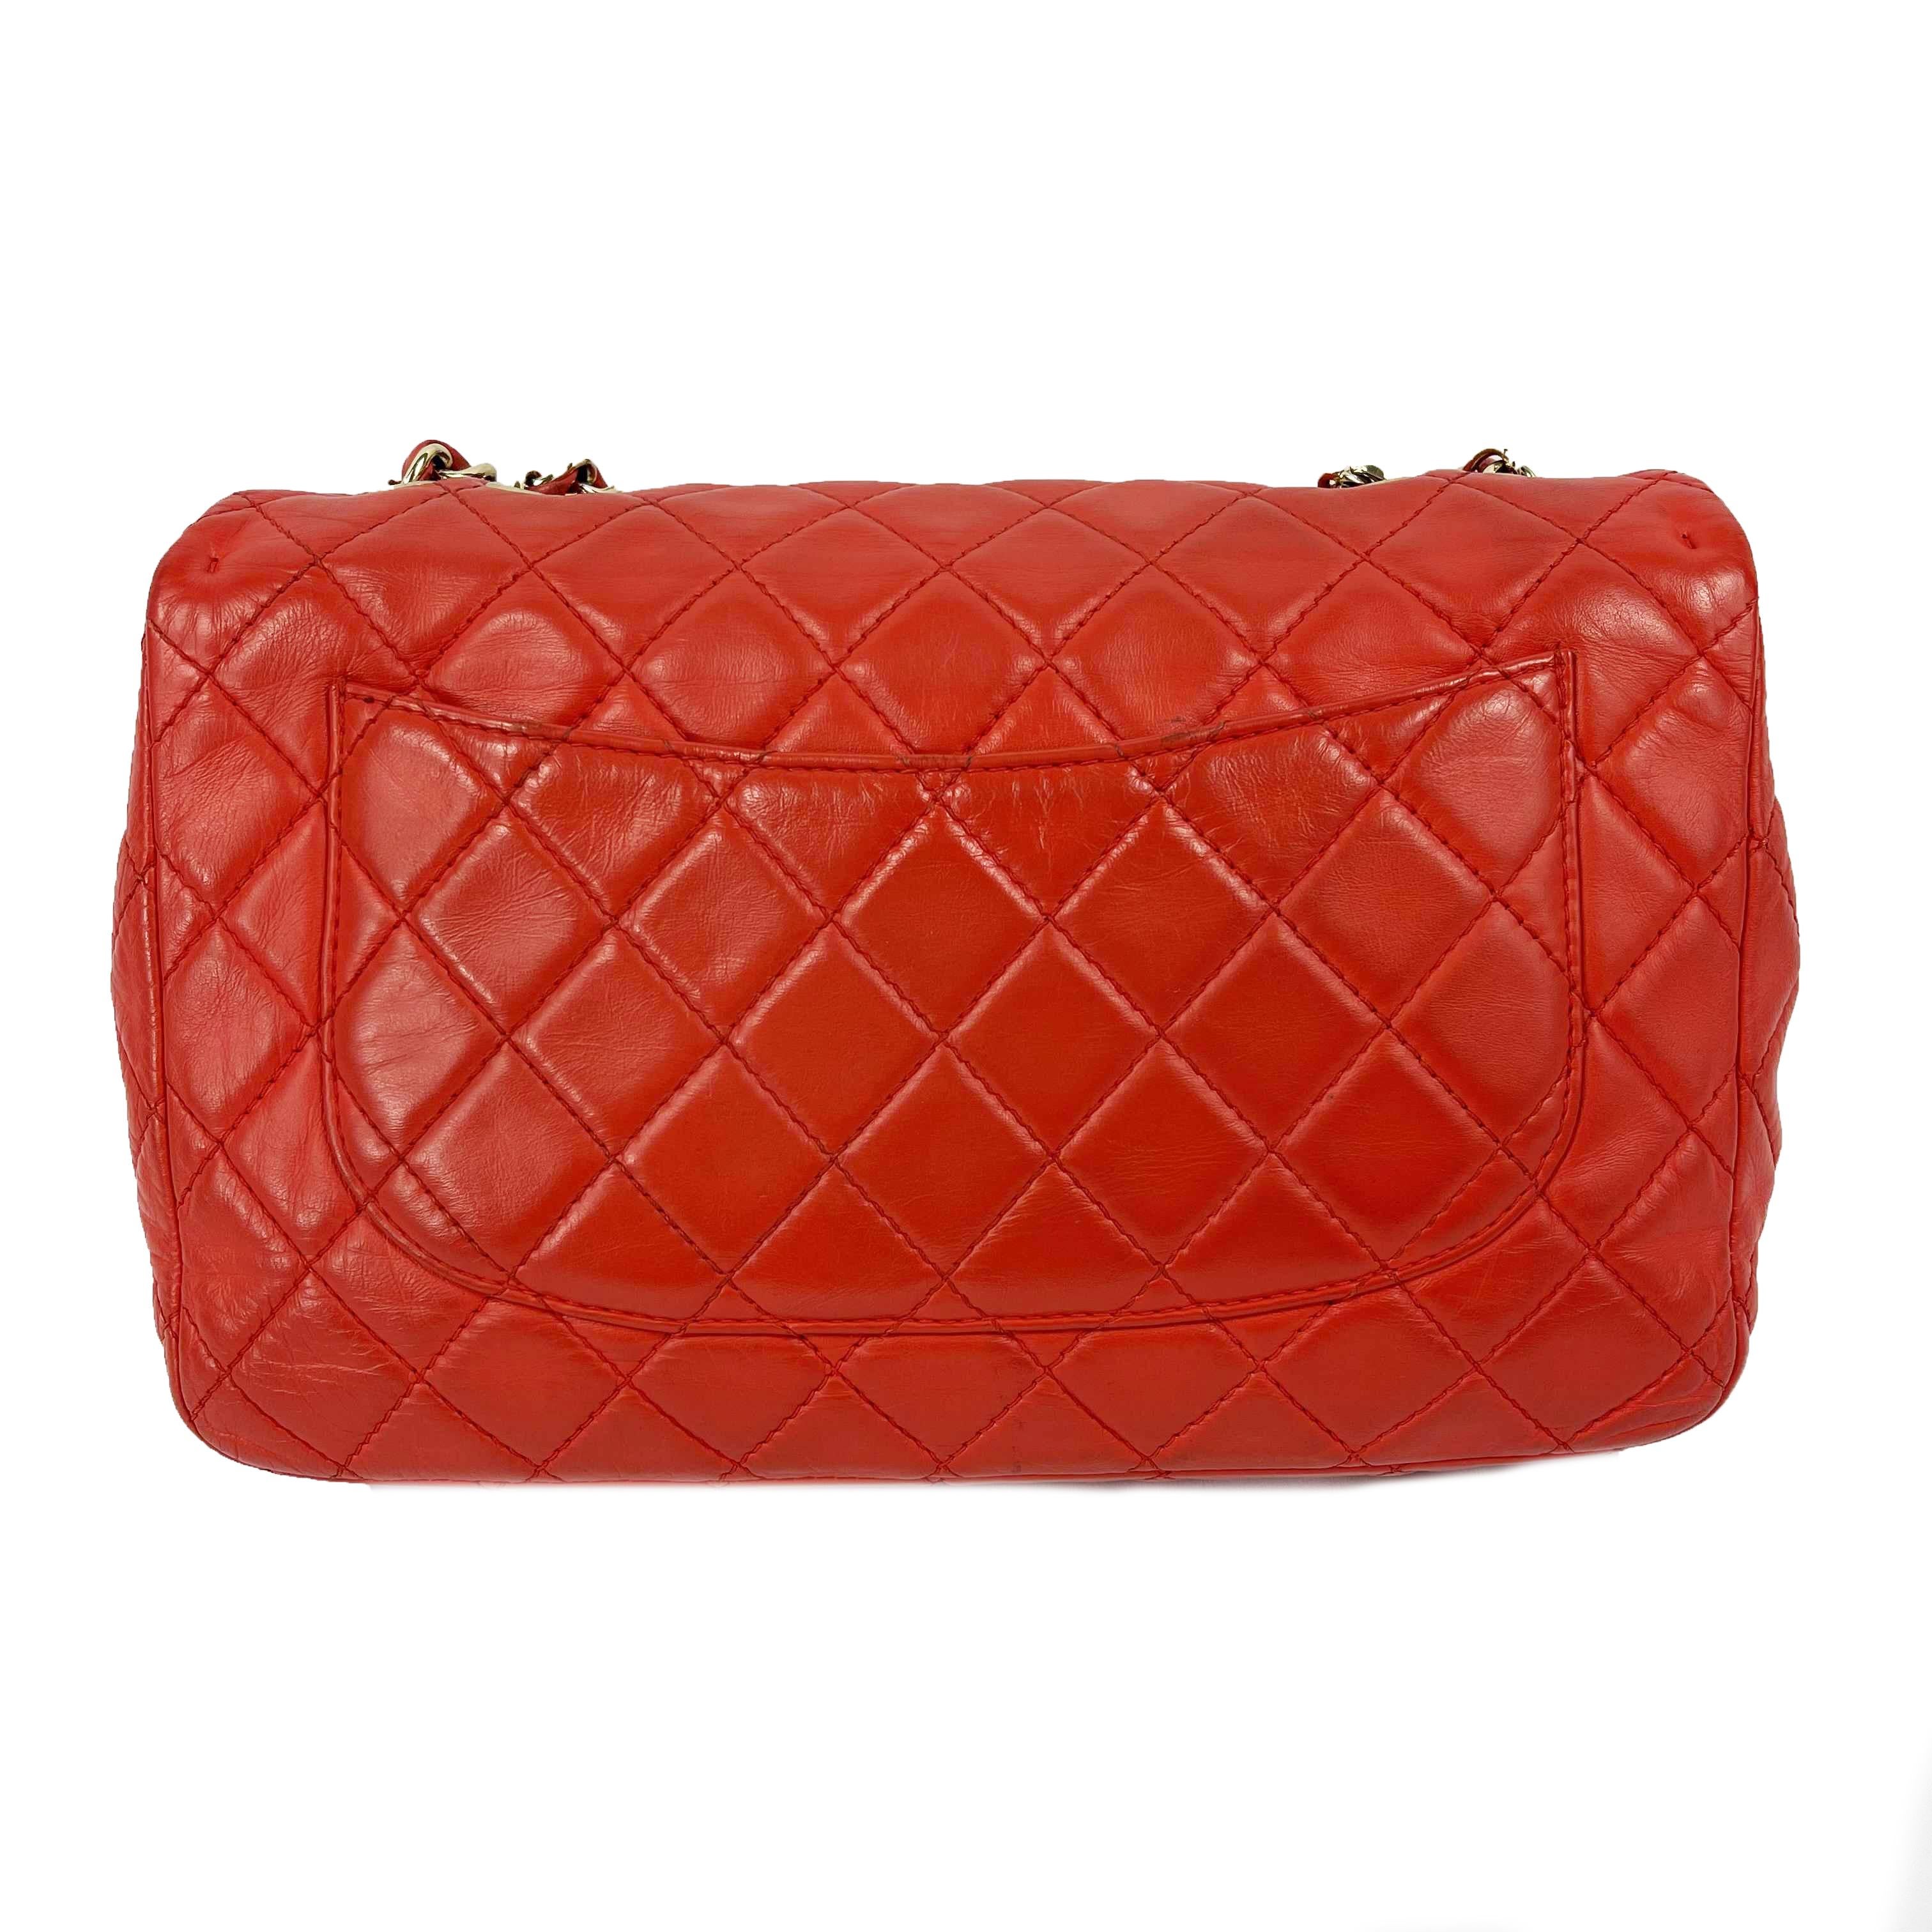 CHANEL - Timeless Jumbo Classic Flap - Orange/Red Lambskin Shoulder Bag

Description

2008-2009 Collection Era.
This handbag is crafted in an orange based red lambskin leather with the Chanel signature diamond quilt pattern.
CC turn lock